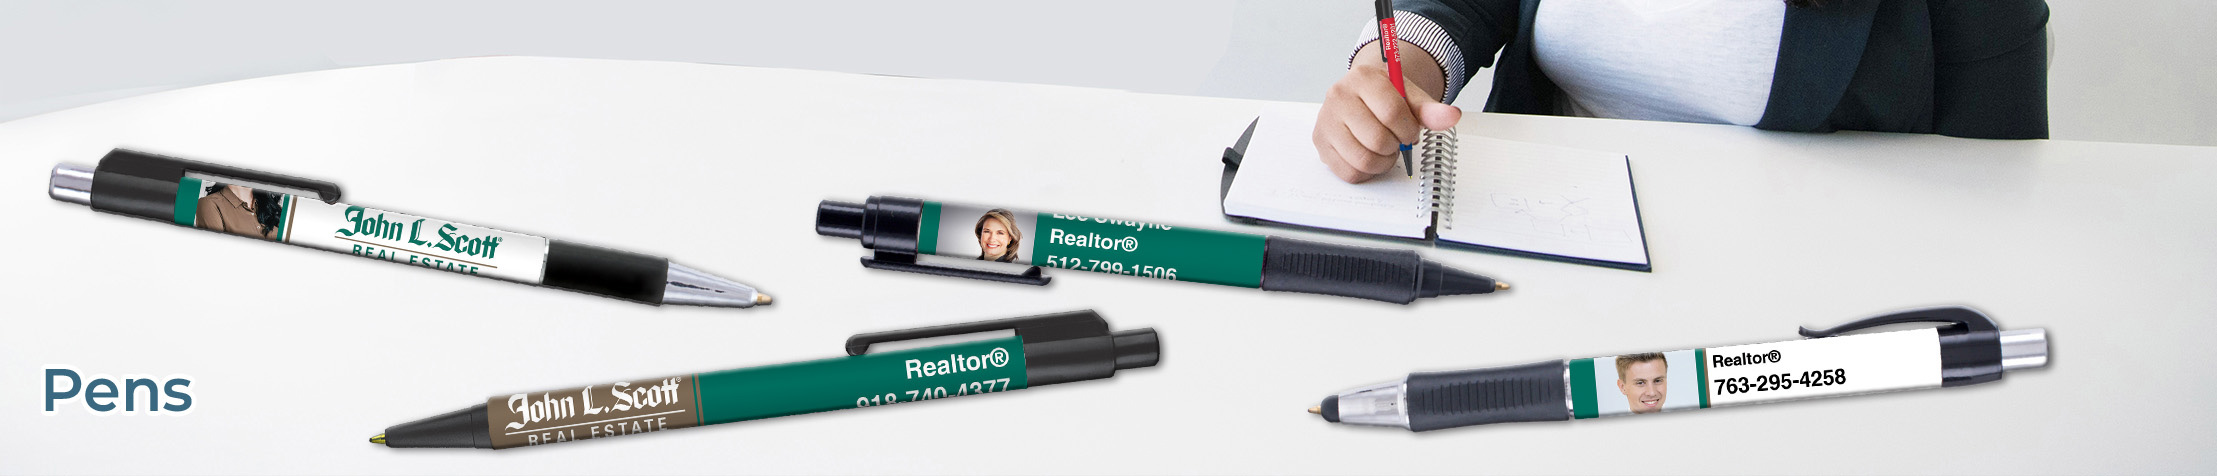 John L. Scott Real Estate Personalized Pens - promotional products: Grip Write Pens, Colorama Pens, Vision Touch Pens, and Colorama Grip Pens | BestPrintBuy.com